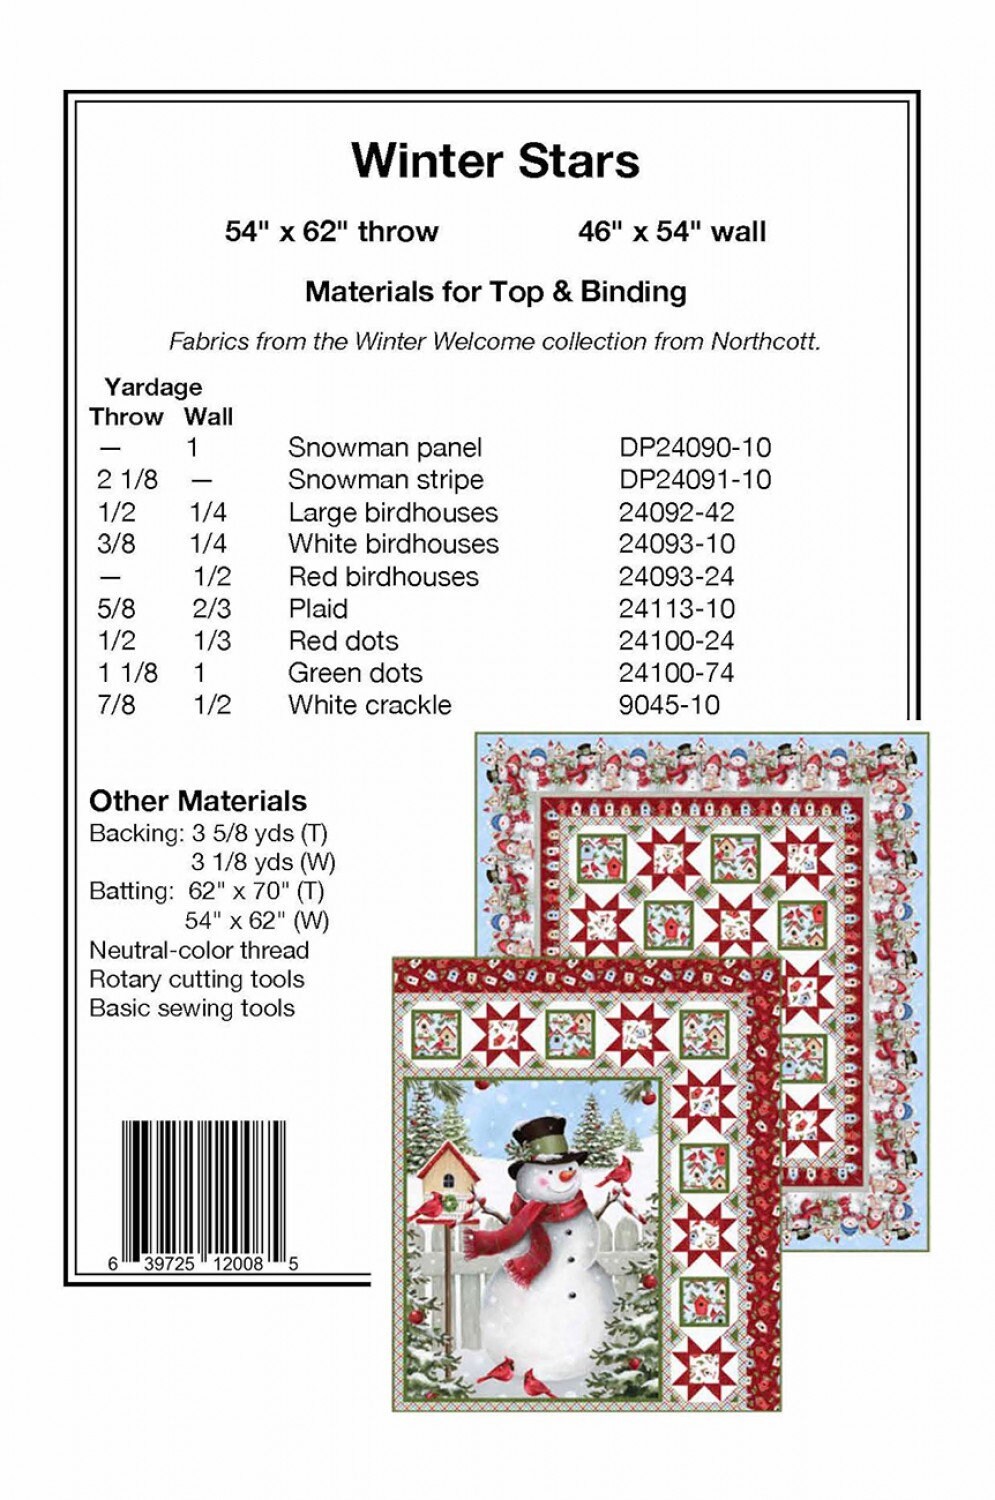 Winter Stars Panel Frame Quilt Pattern, Pine Tree Country Quilts PTN2774, 36" Fabric Panel Friendly, Star Quilt Pattern